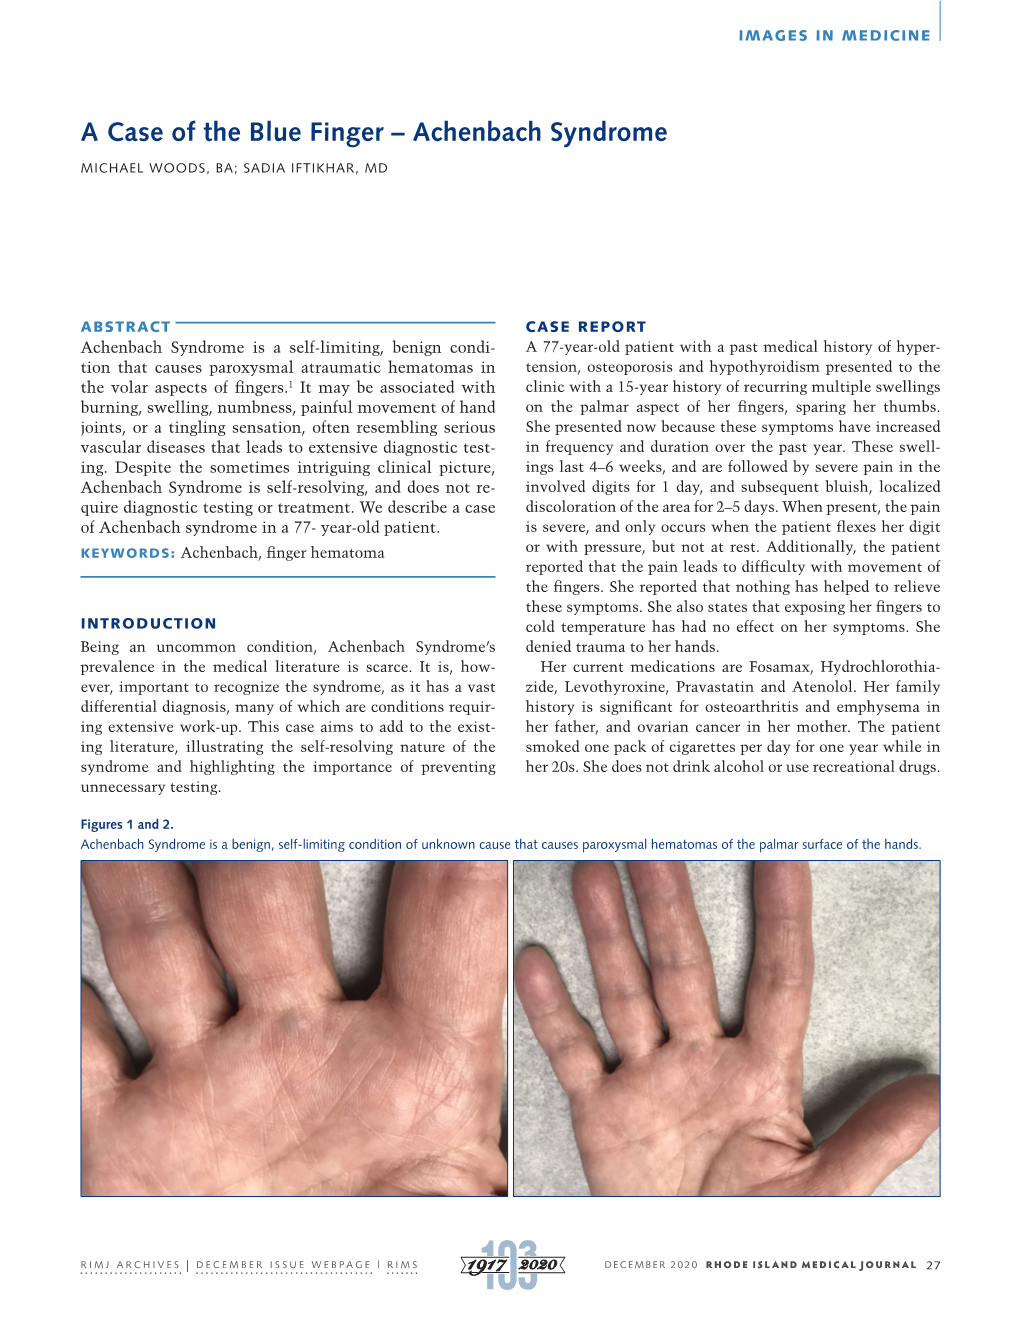 A Case of the Blue Finger – Achenbach Syndrome